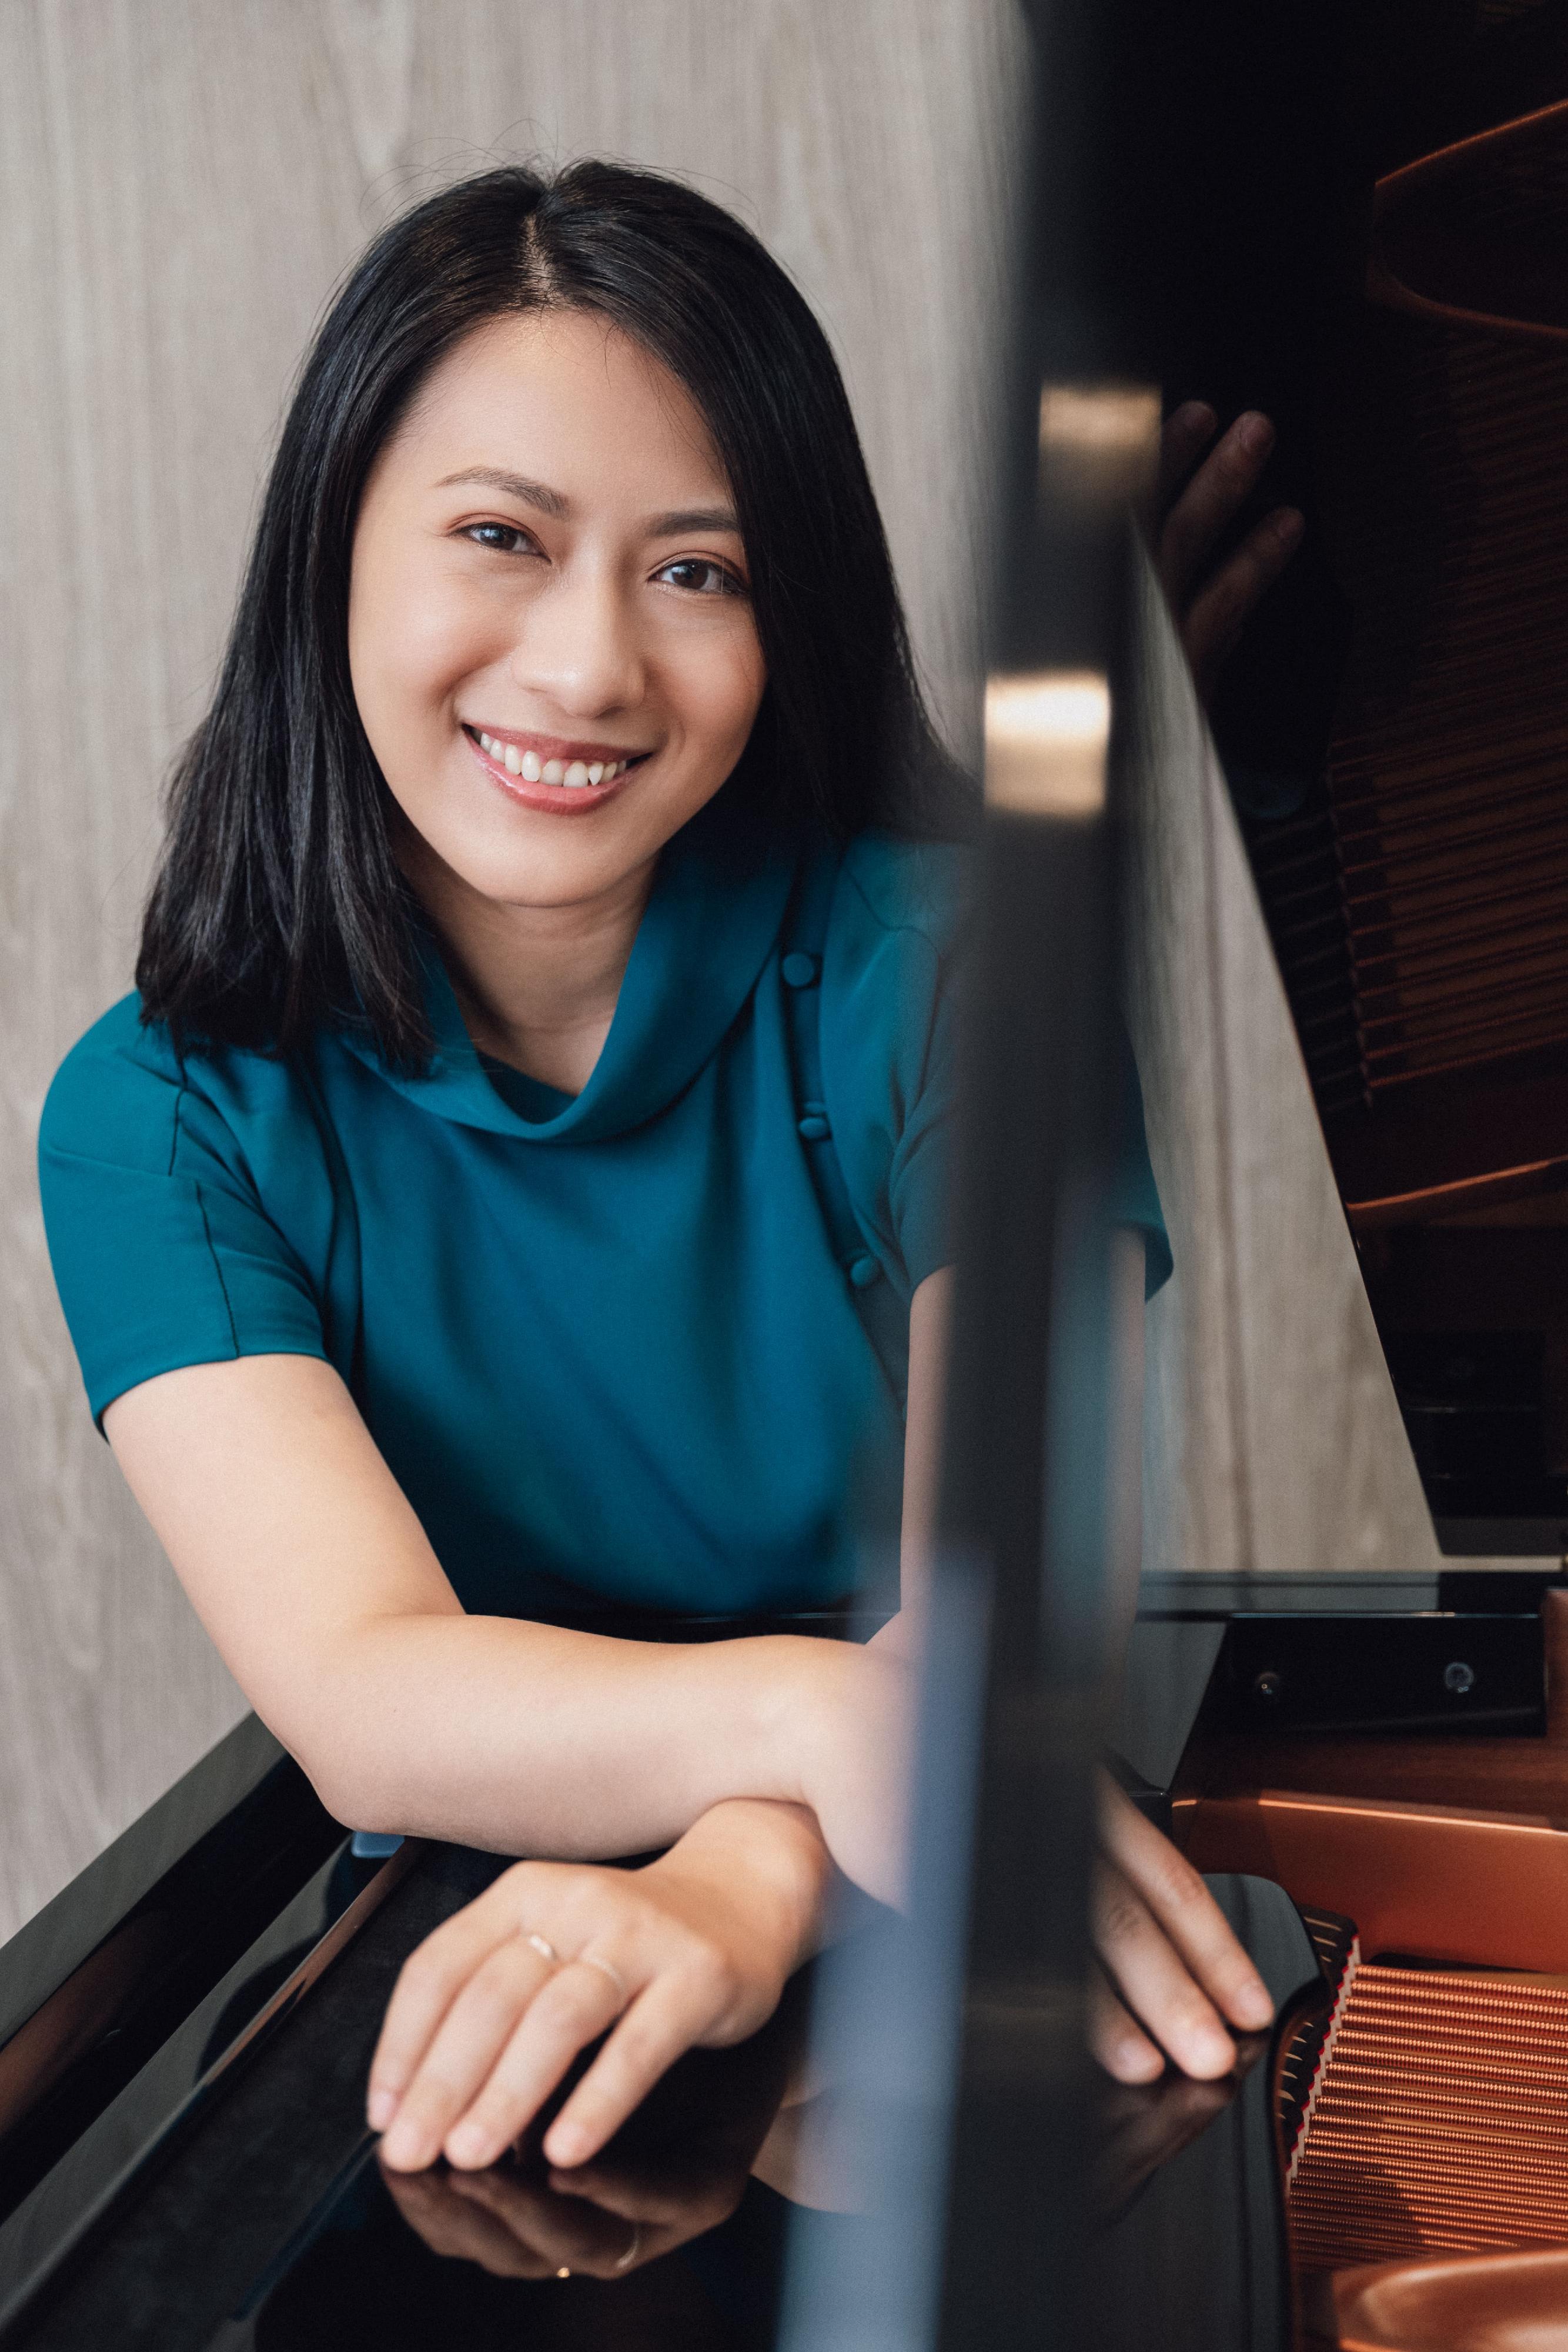 The Leisure and Cultural Services Department's "Our Music Talents" Series will present a saxophone recital by saxophonist Chemie Ching, together with pianist Cherry Tsang and drummer Nate Wong, in November. Photo shows Tsang.